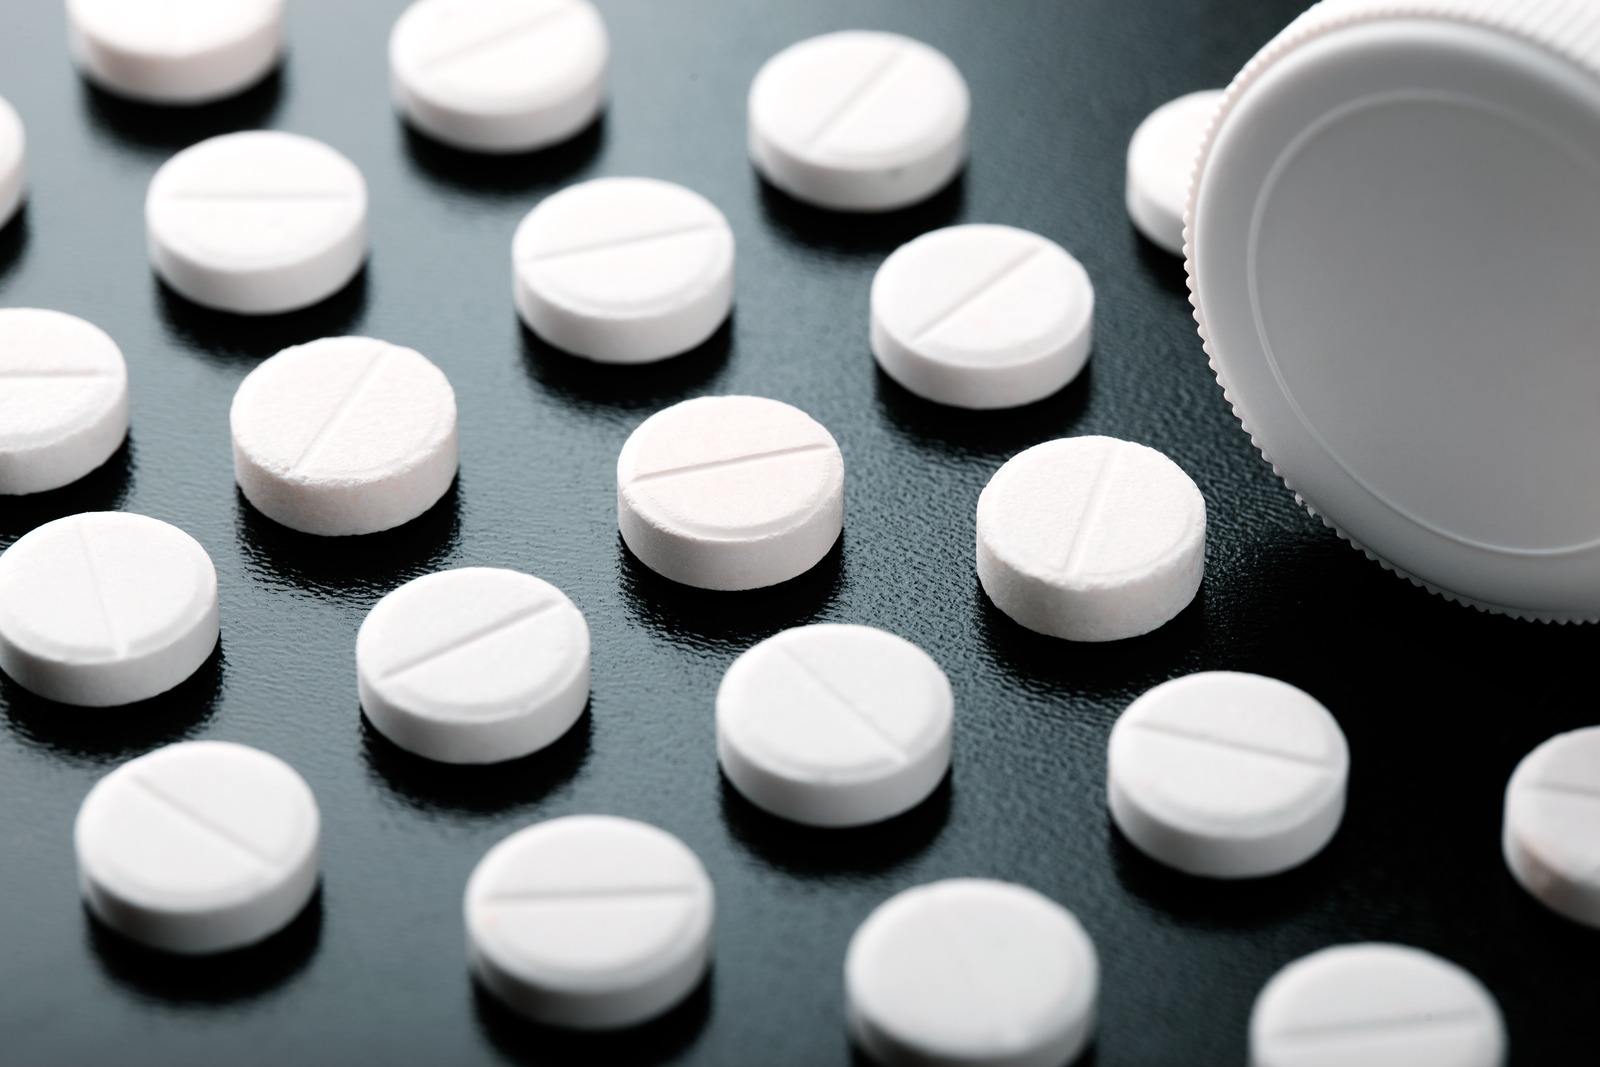 What Is Xanax® And How Long Does Xanax® Stay In Your System?